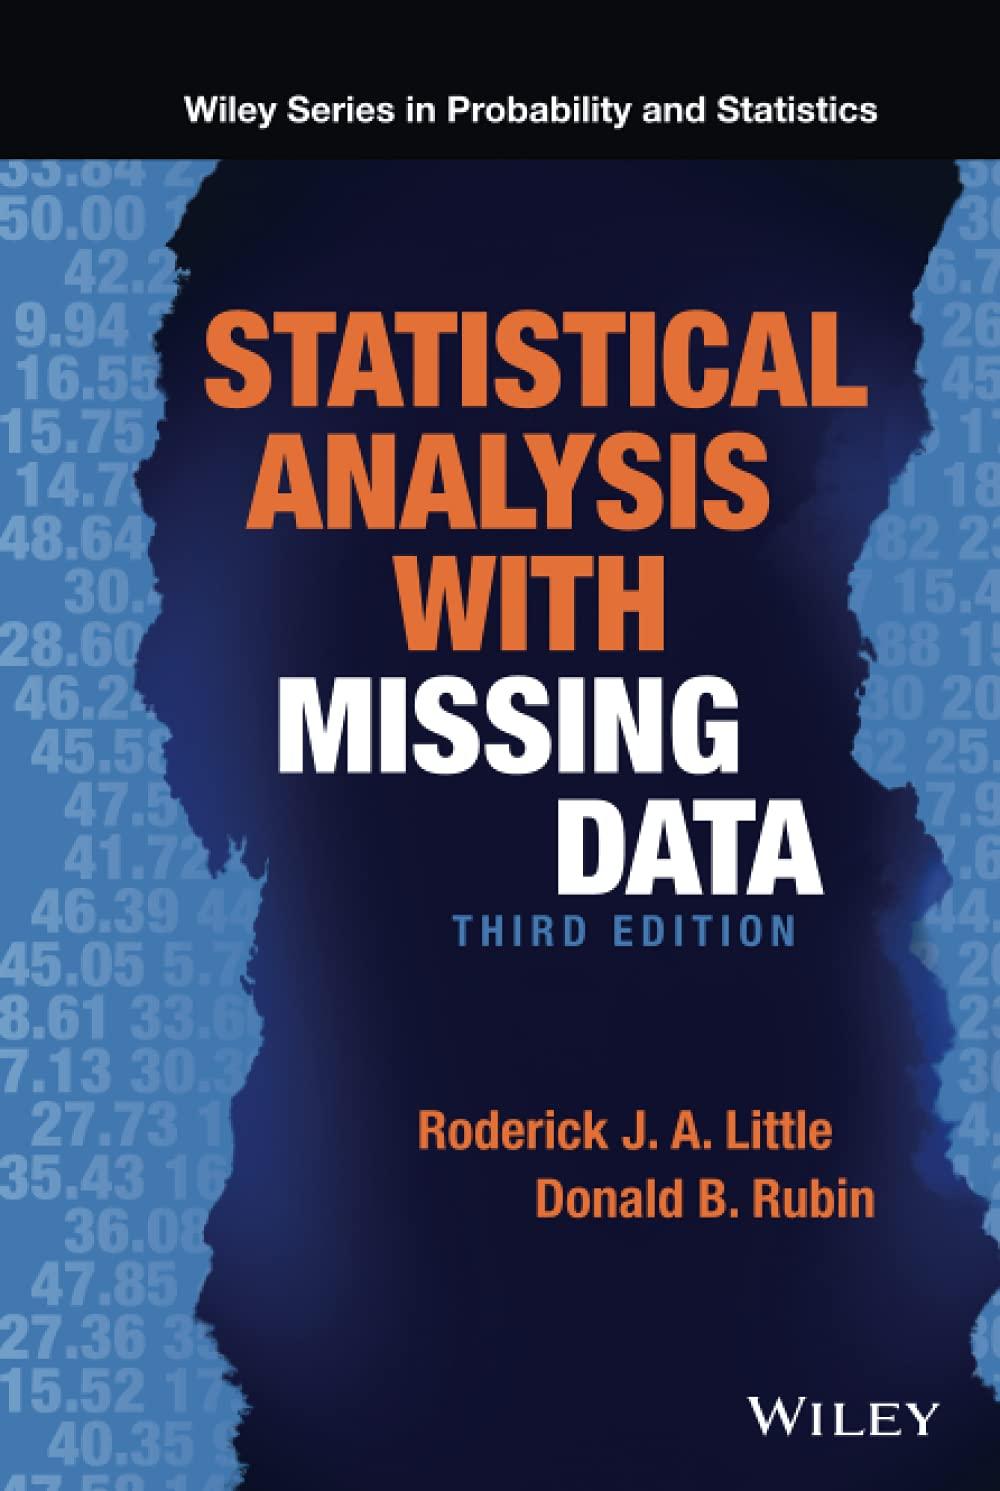 statistical analysis with missing data 3rd edition roderick j. a. little, donald b. rubin 0470526793,